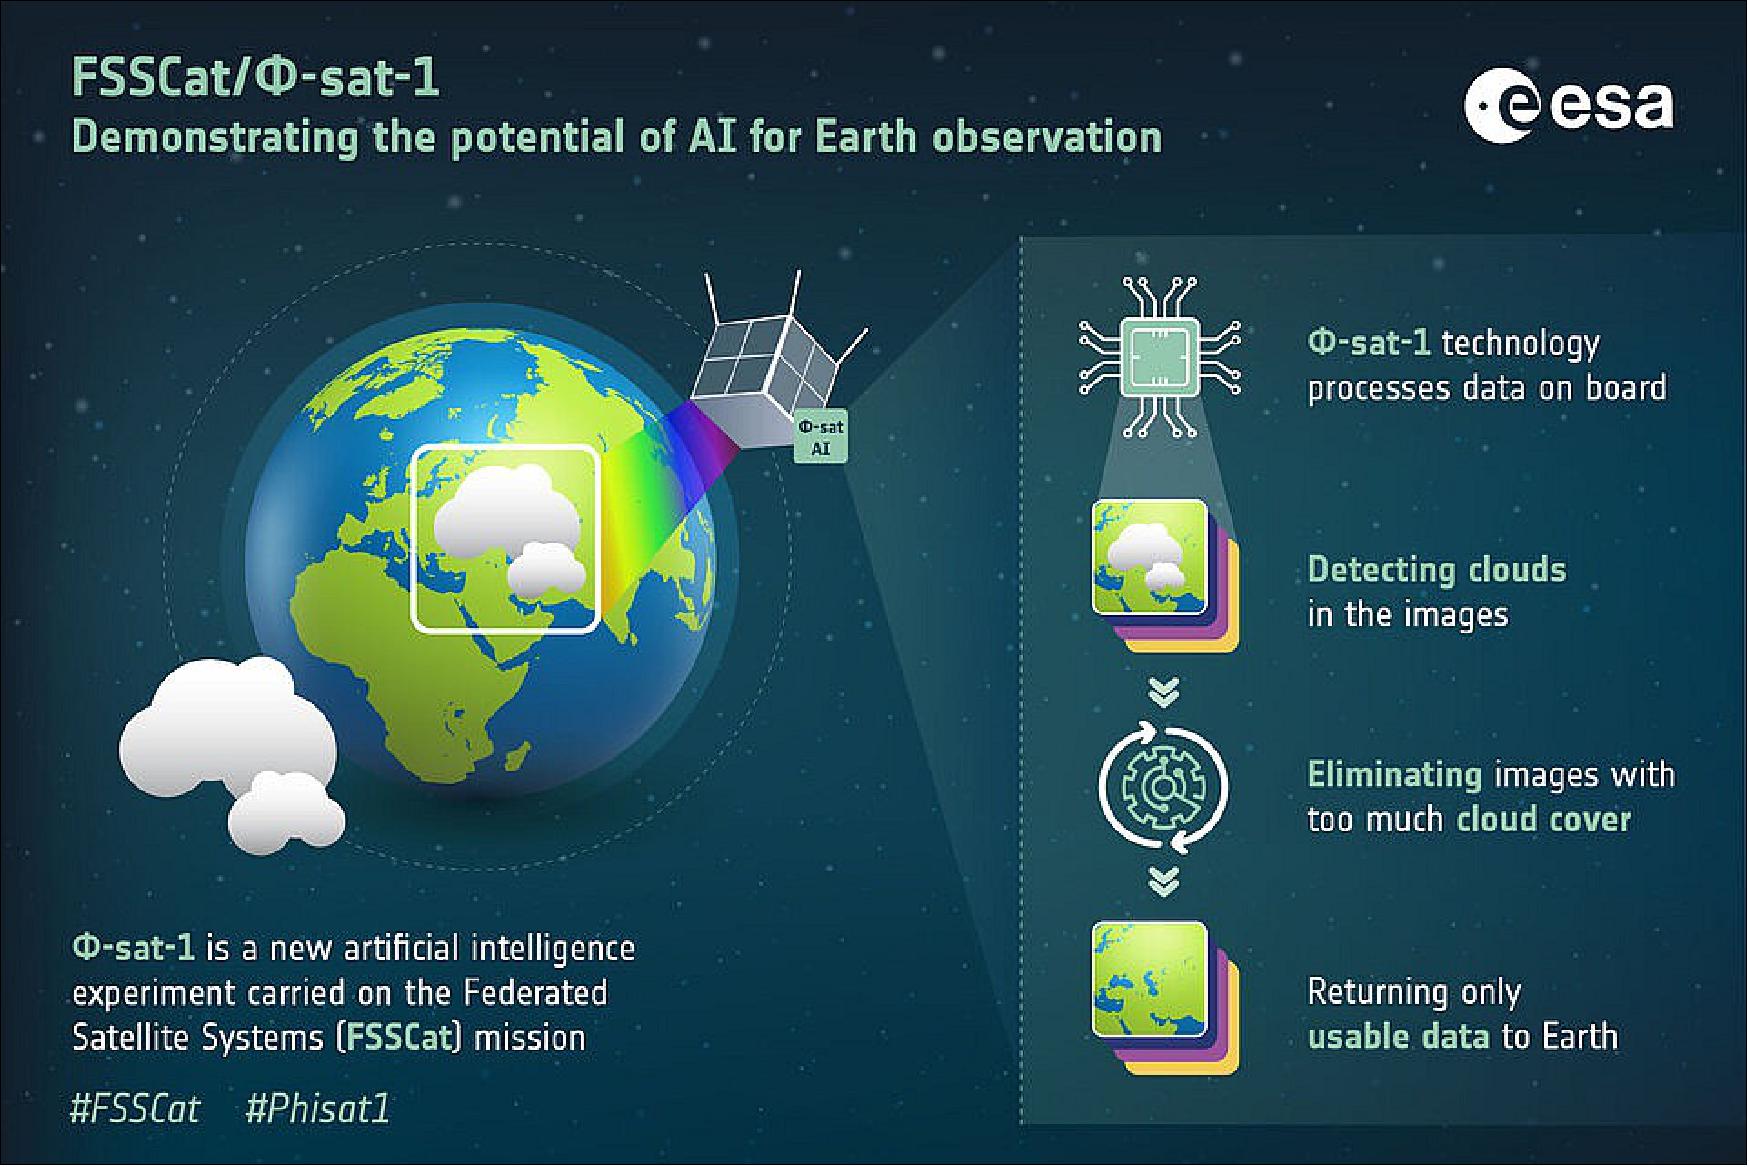 Figure 11: FSSCat/φ-sat-1. Demonstrating the potential of AI for Earth observation, φ-sat-1 is an artificial intelligence experiment carries on the Federated Satellite Systems (FSSCat) mission (image credit: ESA)